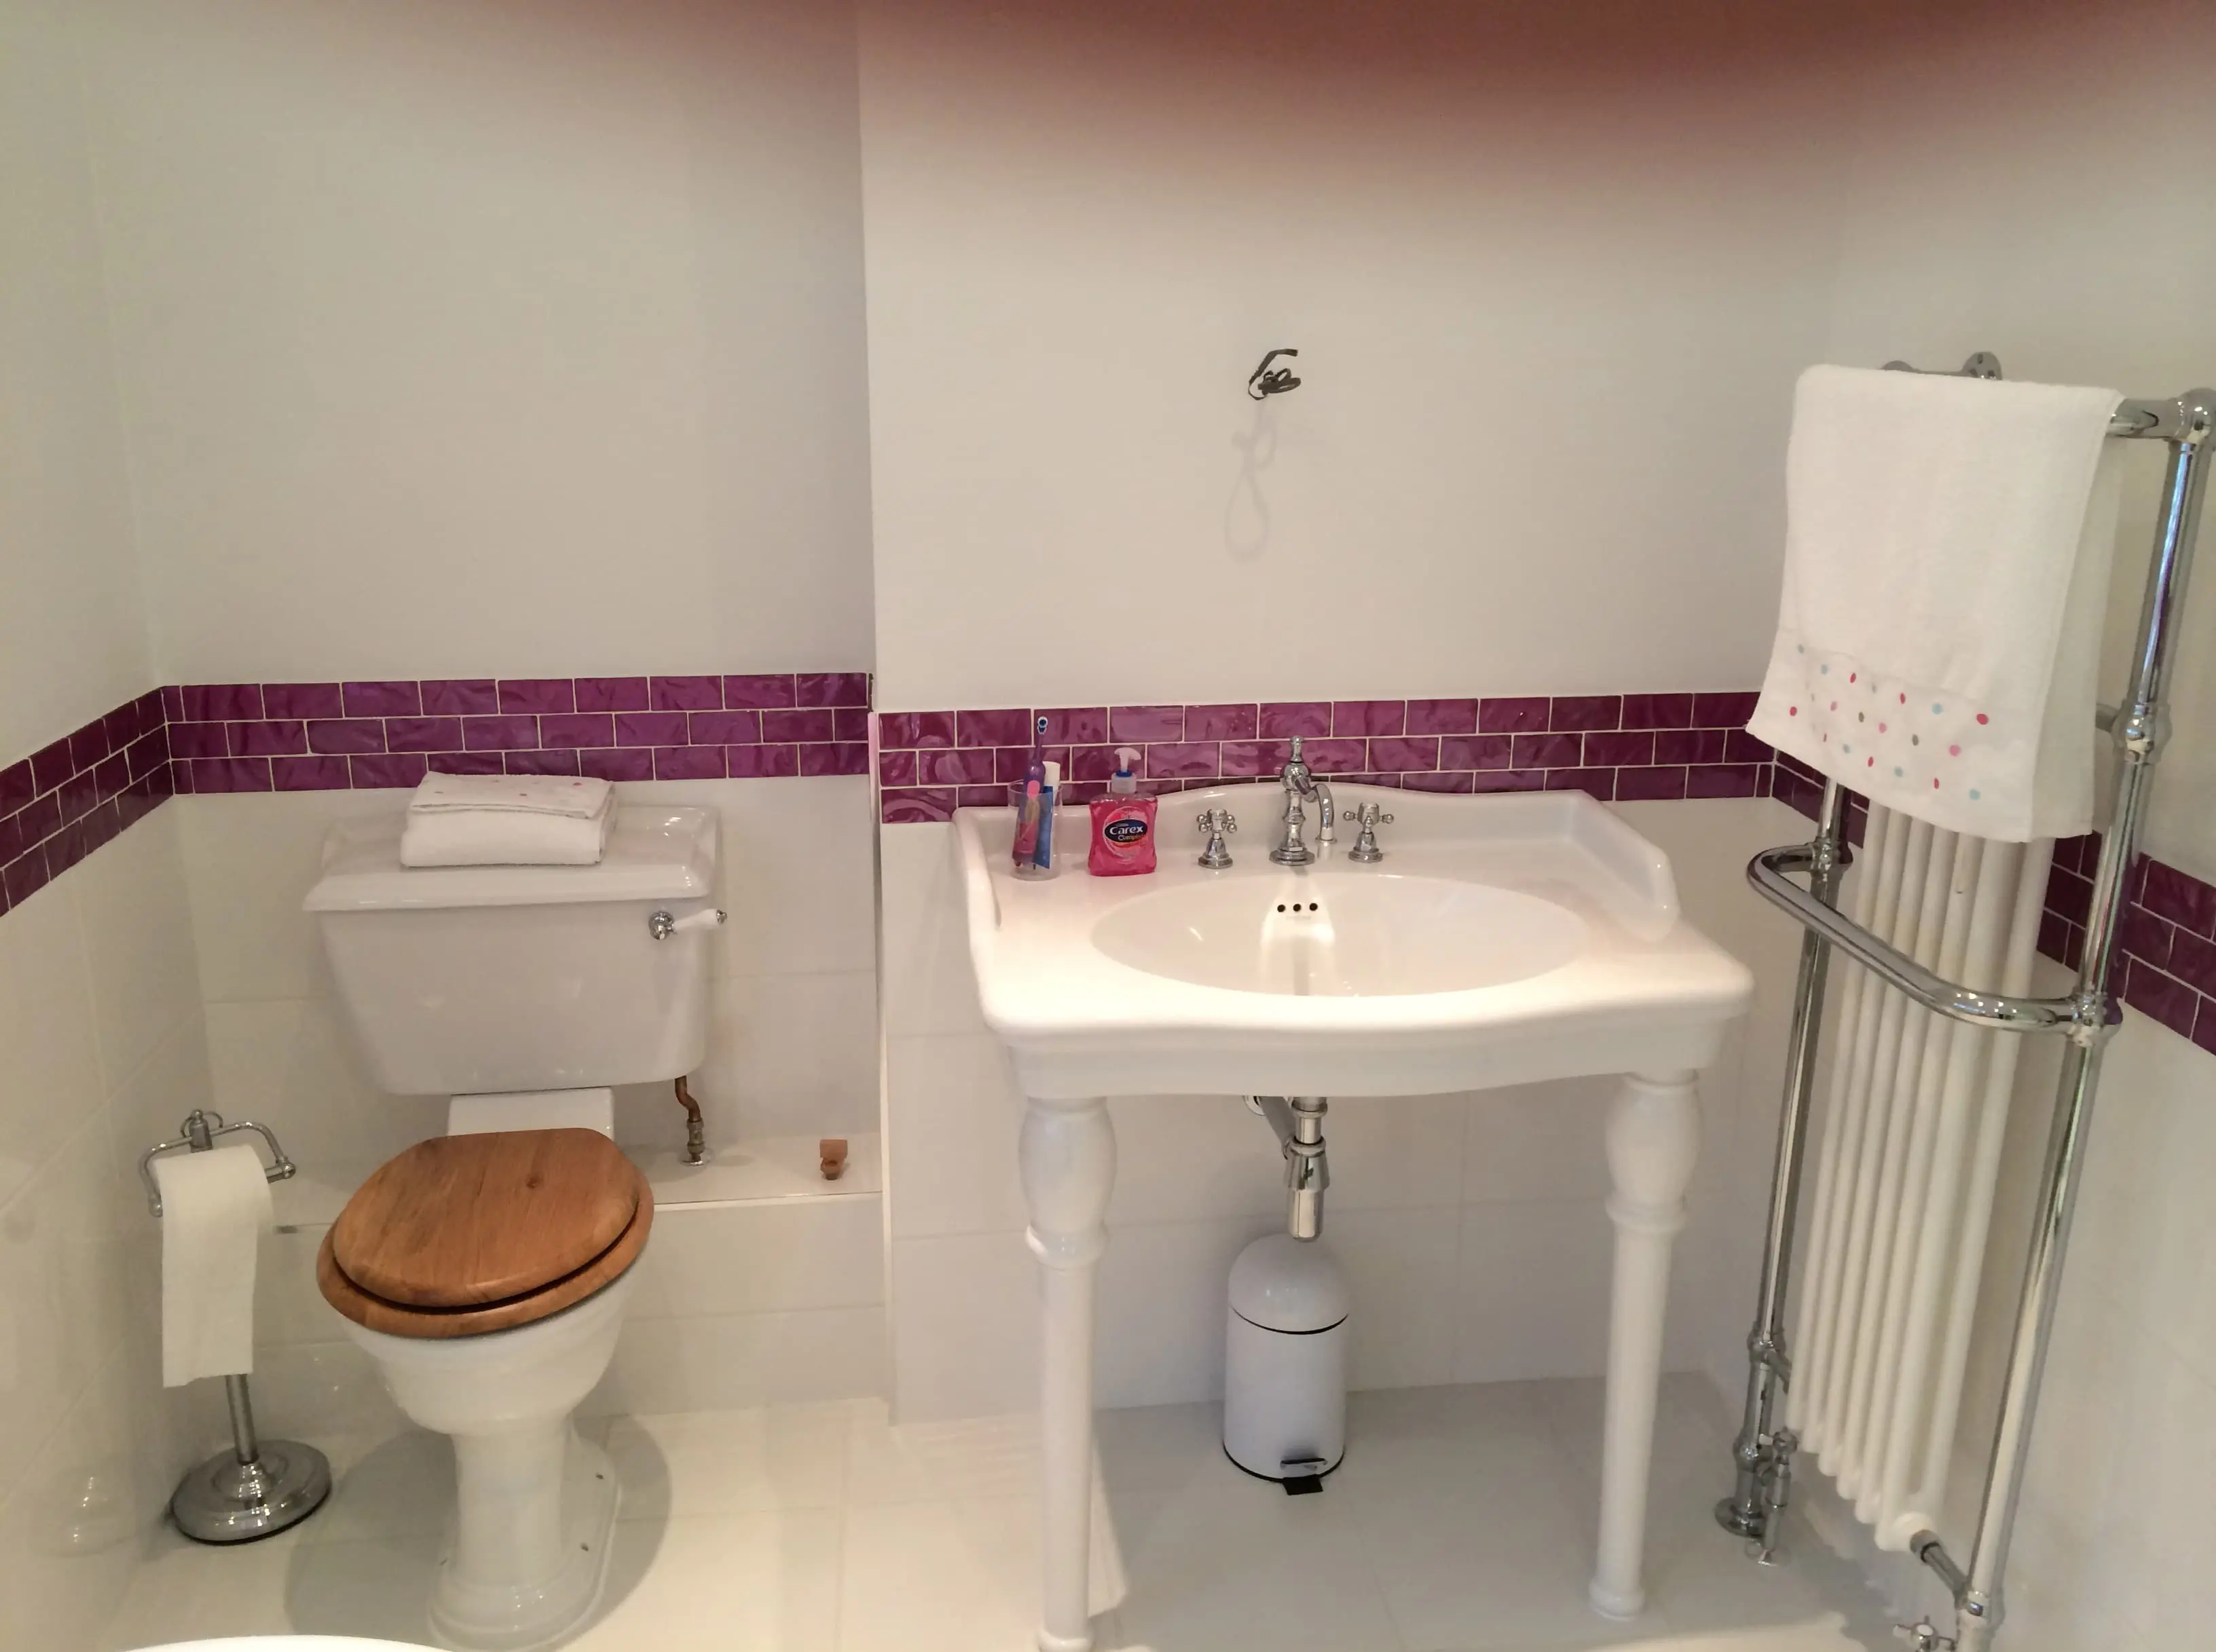 With&nbsp;over 42 years of experience, I can supply and fit bathroom fittings at competitive prices in the following areas:ReadingCalcotWokinghamBracknellWoodleyAnd many areas more in and around&nbsp;Shinfield!Whether you want me to install a&nbsp;new wet room&nbsp;or just&nbsp;re-tile&nbsp;your existing bathroom, I can give your home a new look. I take great pride in providing a personalised service to&nbsp;suit your budget and taste.&nbsp;